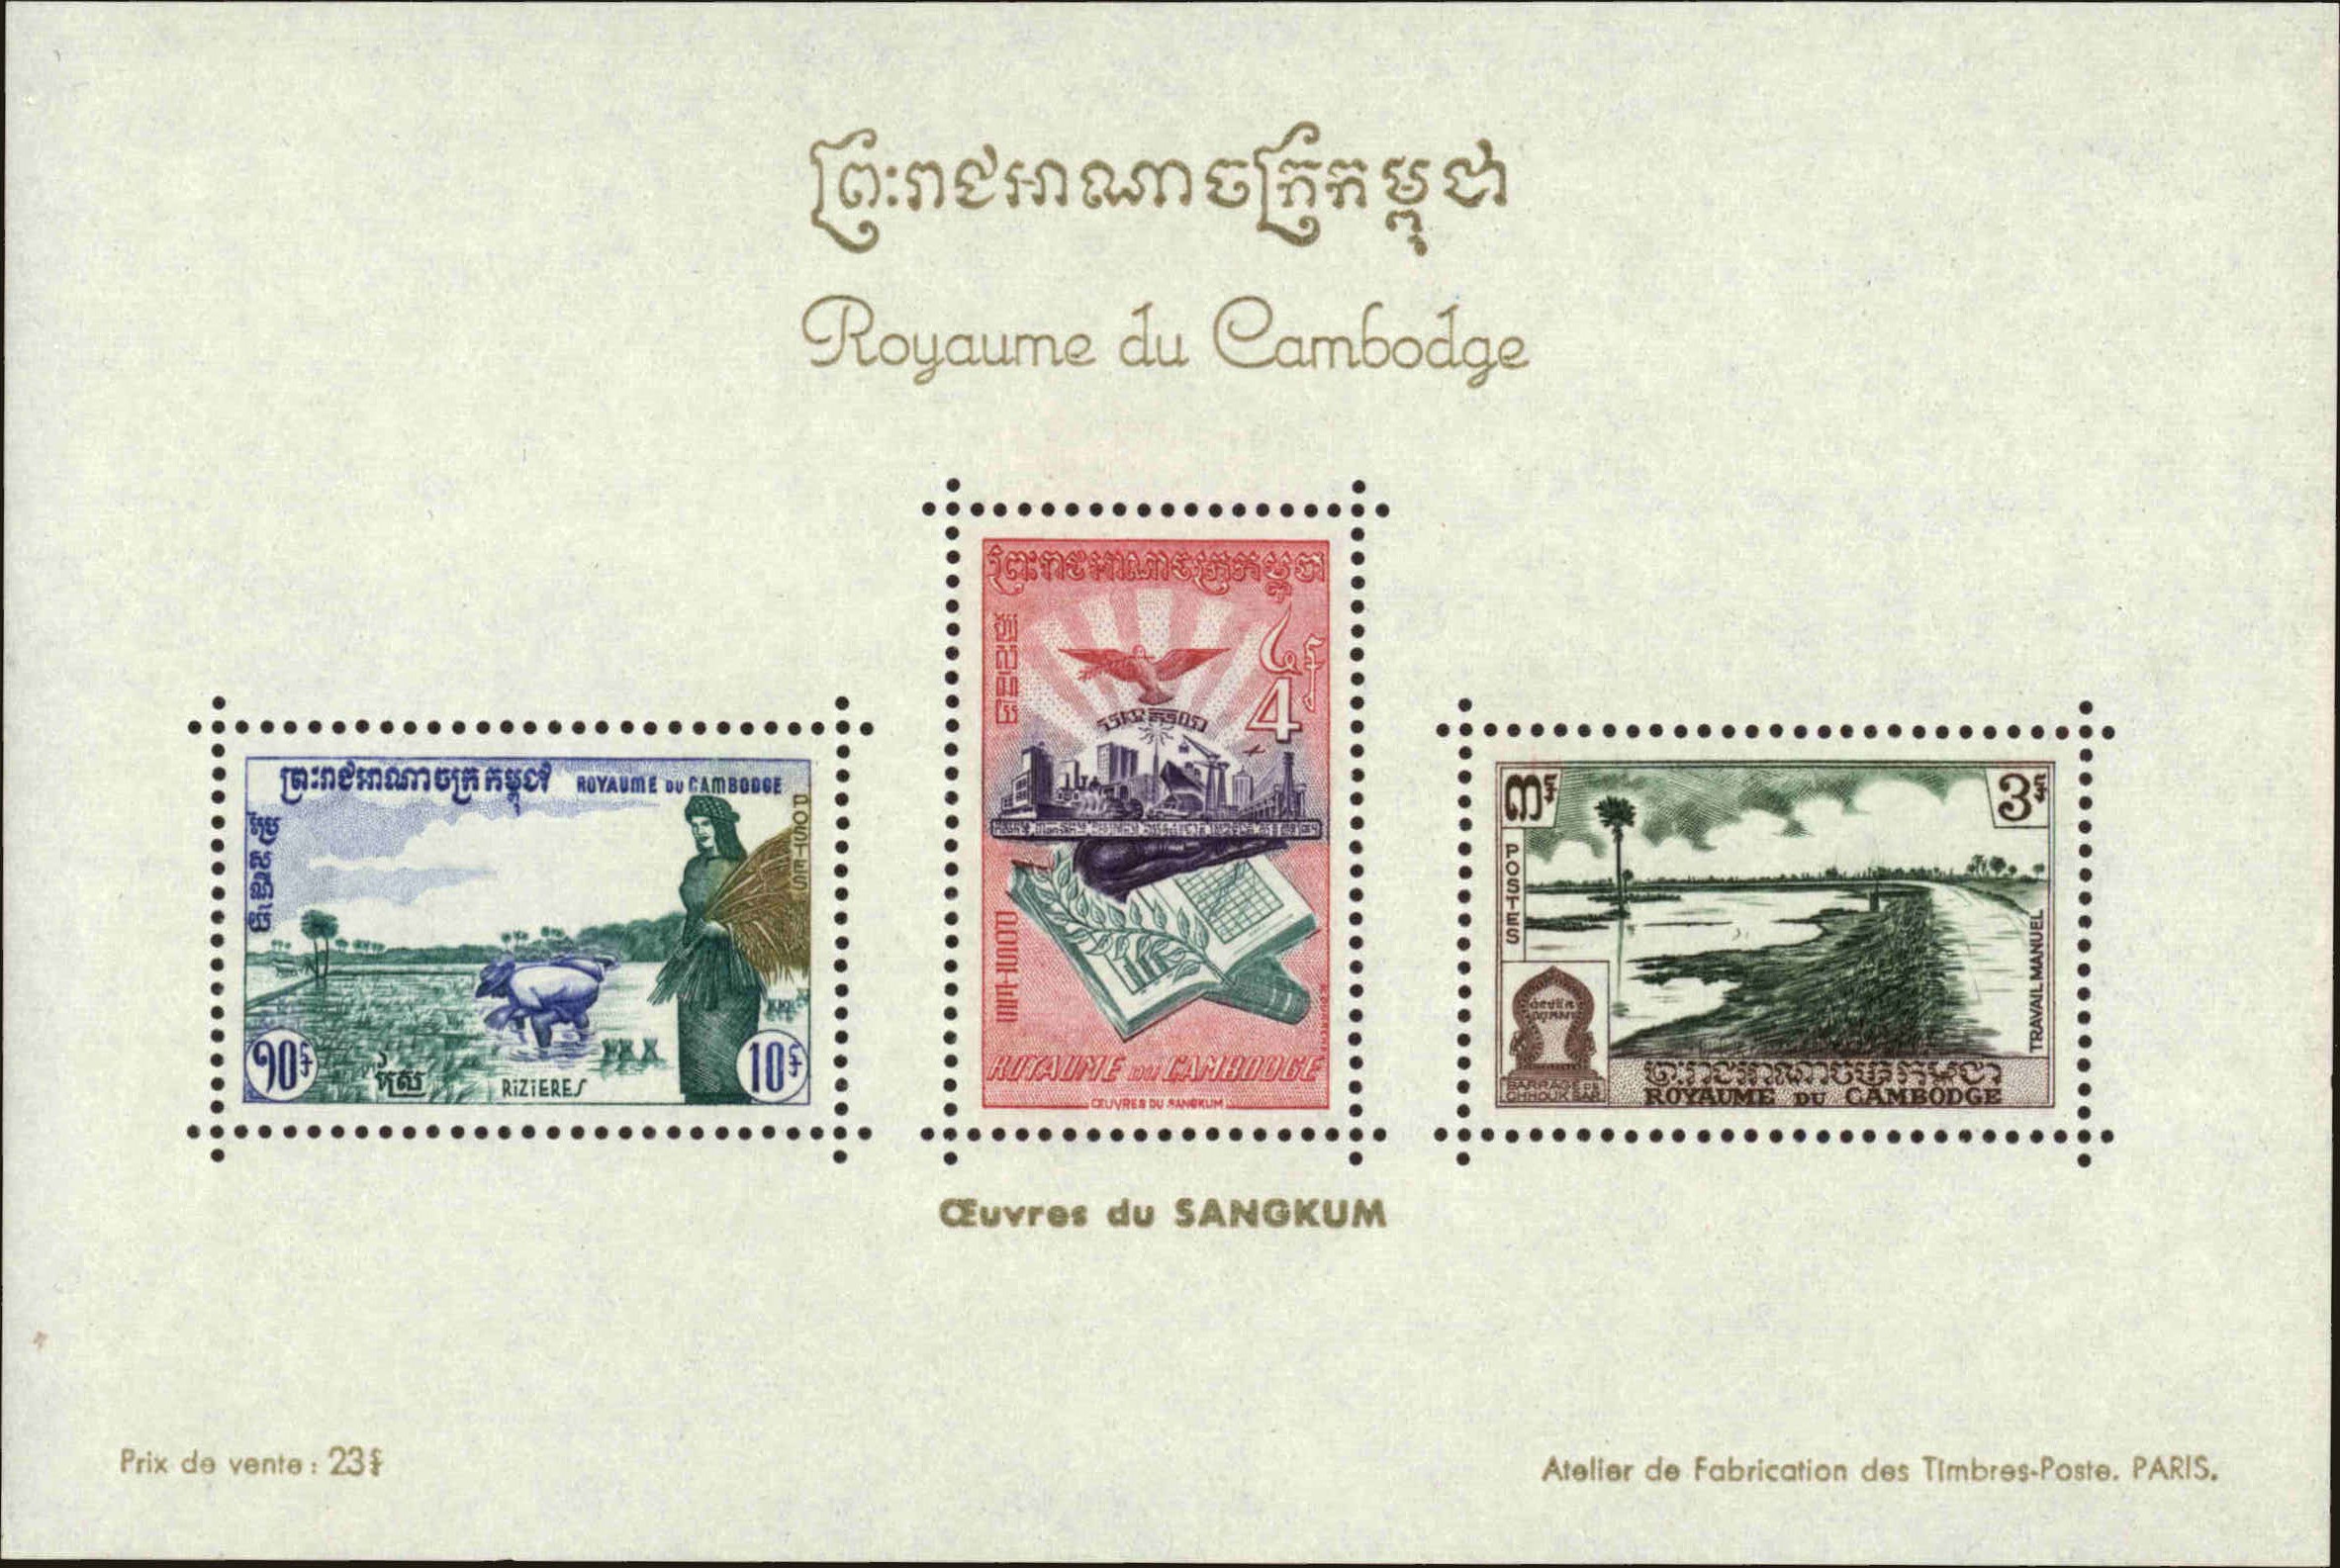 Front view of Cambodia 83a collectors stamp